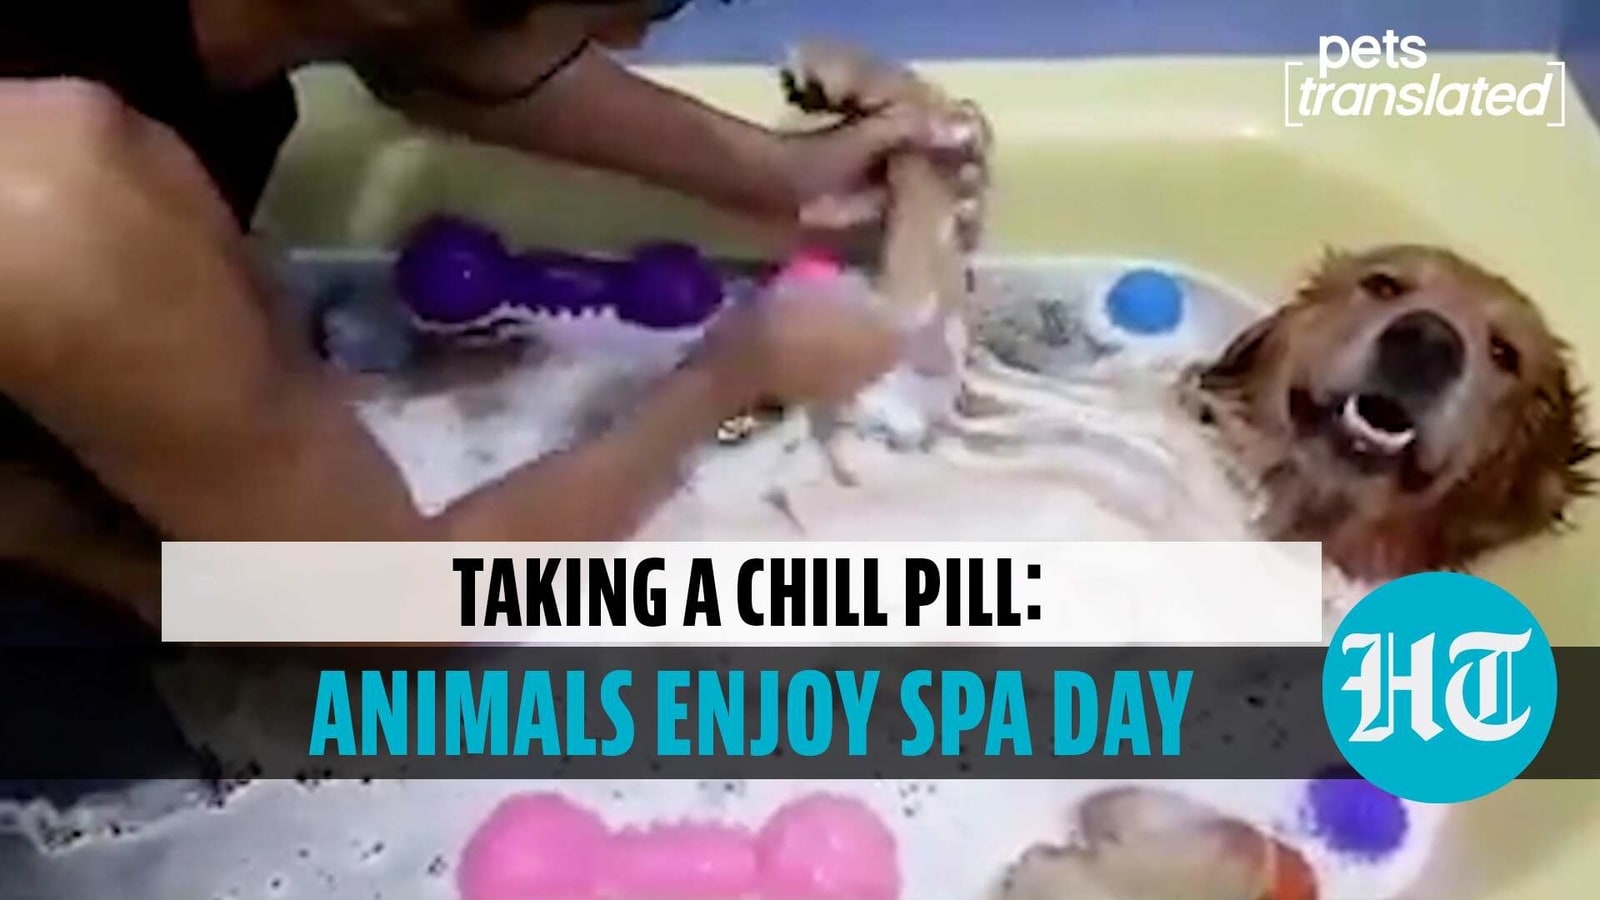 Care for a relaxing time? These animals will show you how